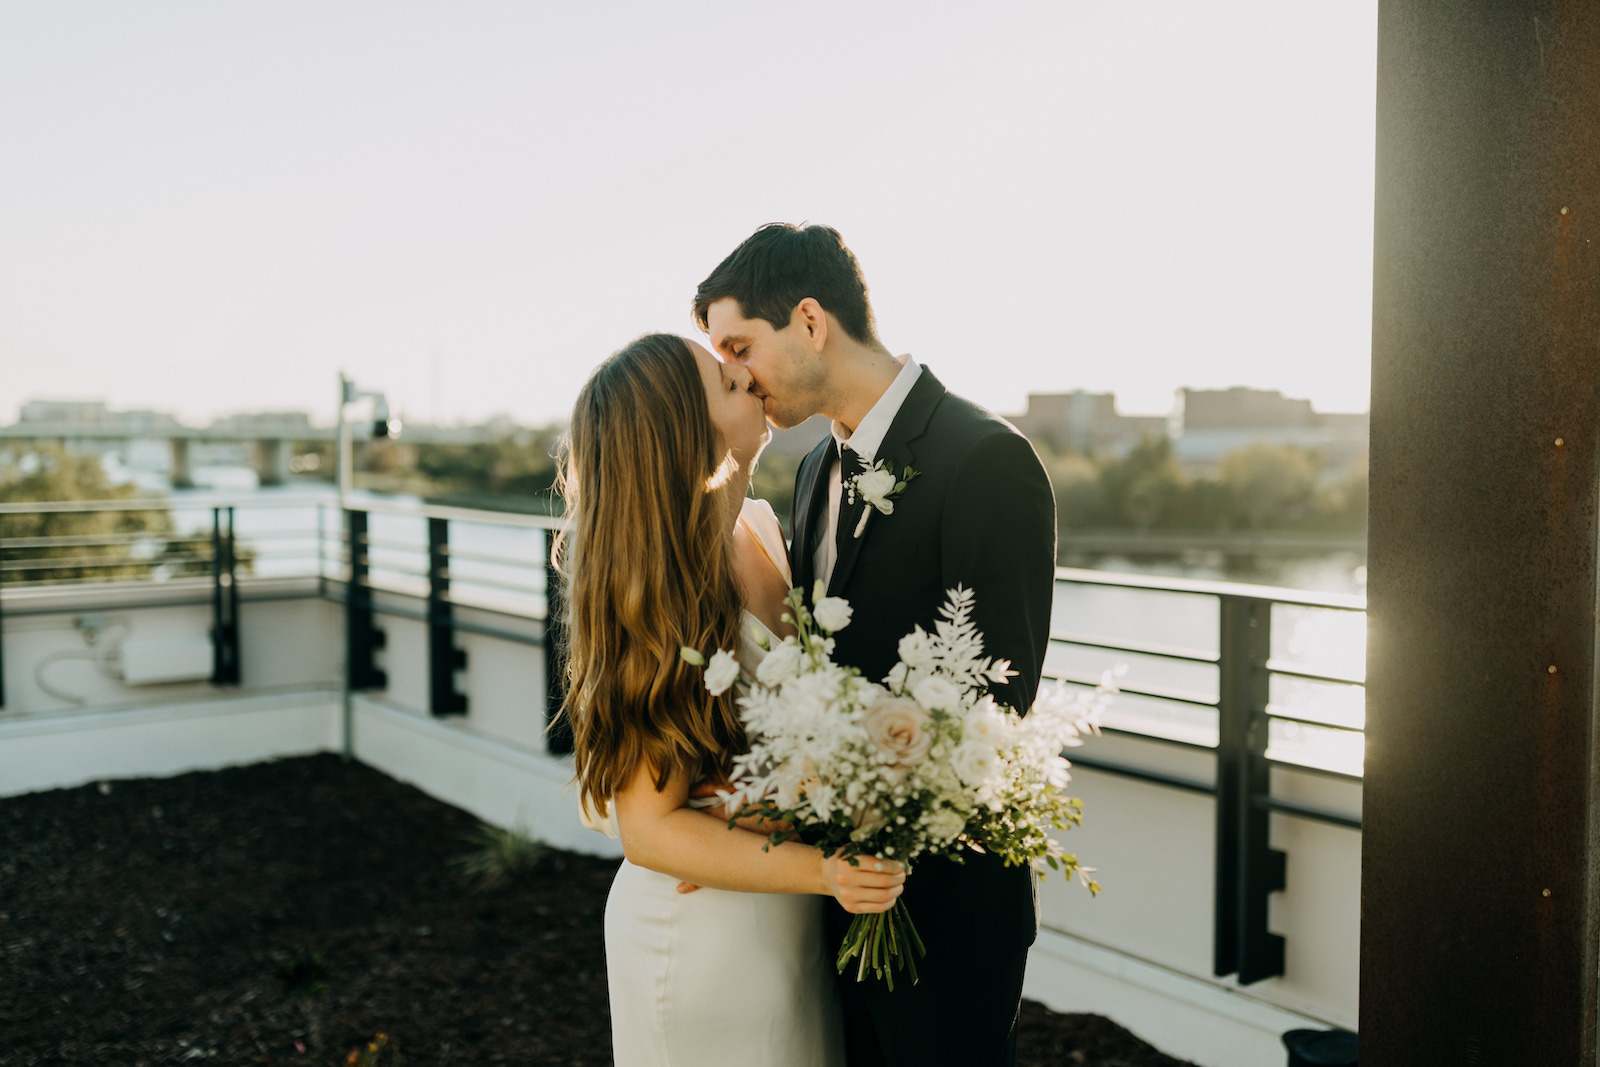 Modern Industrial Bride and Groom Exchanging Kiss Holding All White Neutral Floral Bouquet | Tampa Bay Wedding Planner Elope Tampa Bay | Wedding Venue Rooftop 220 | Wedding Photographer Amber McWhorter